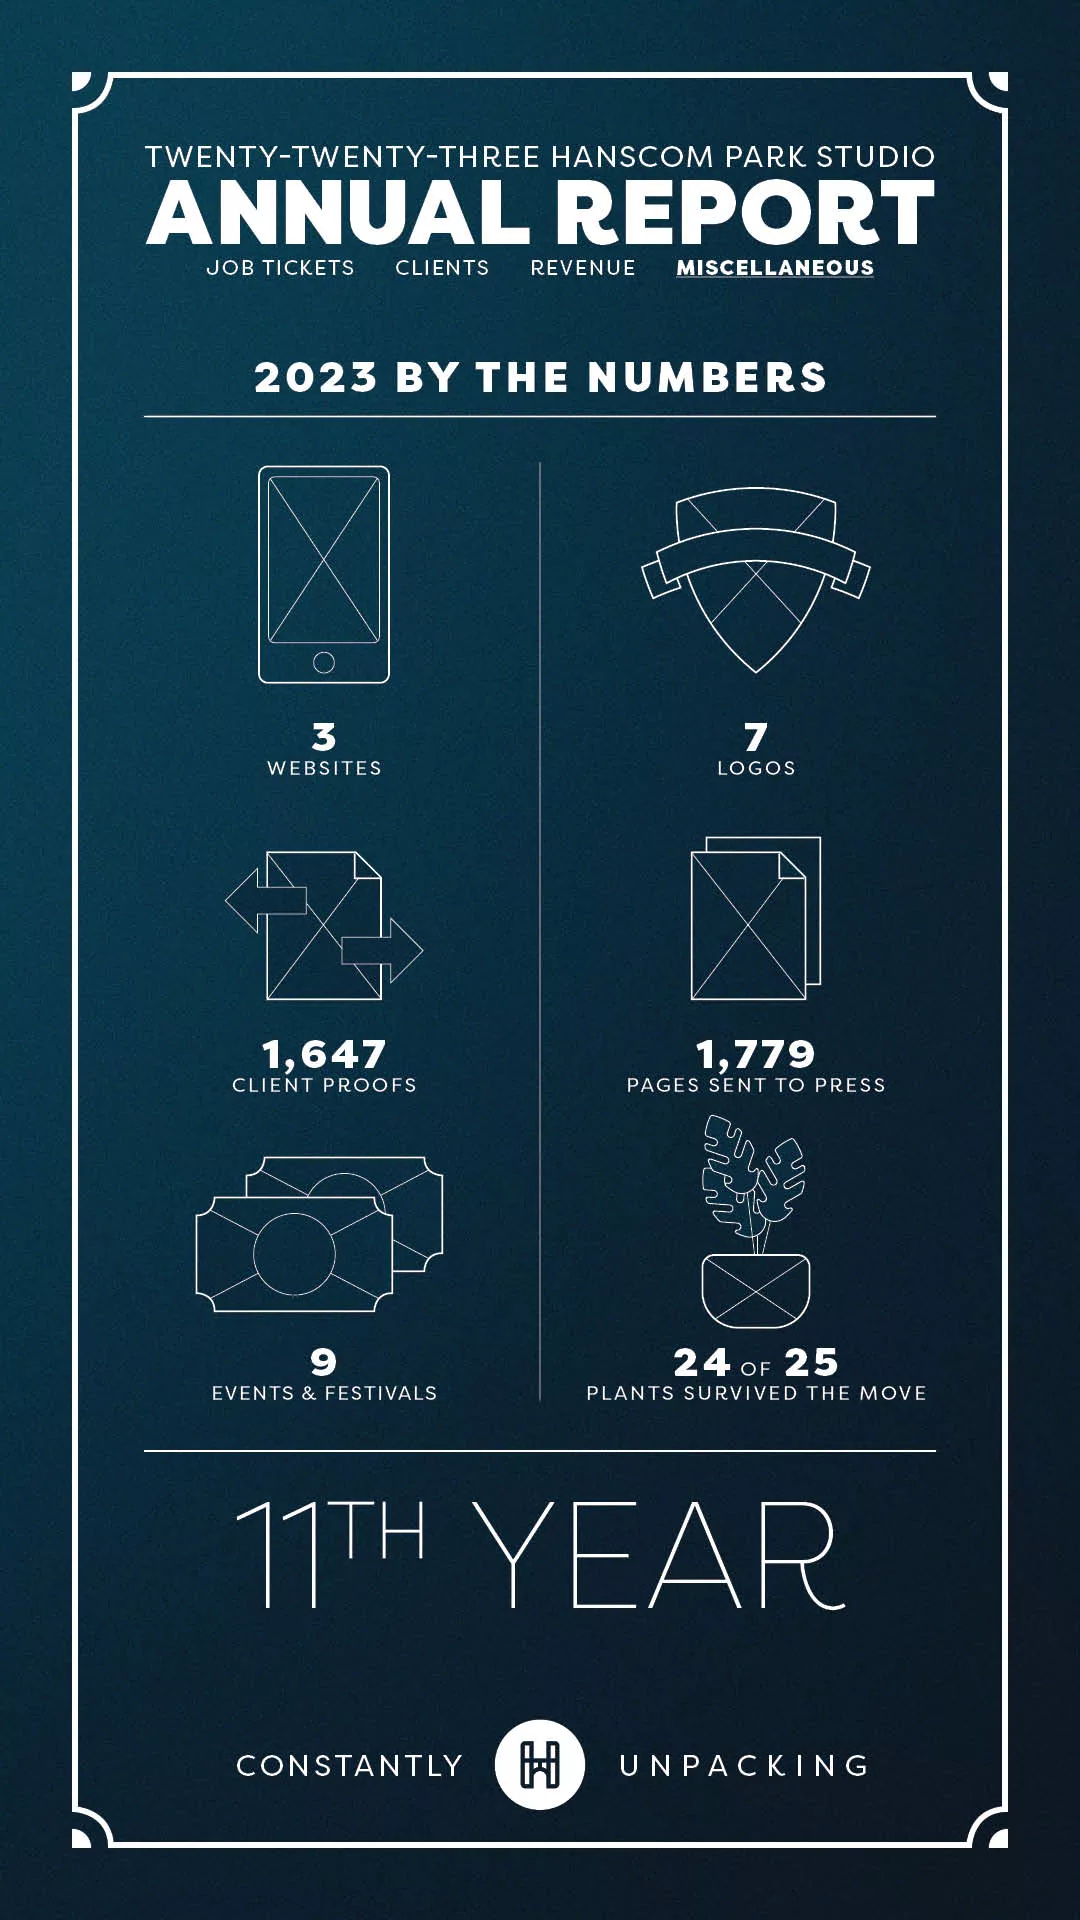 2023 Hanscom Park Studio Annual Report - By the Numbers